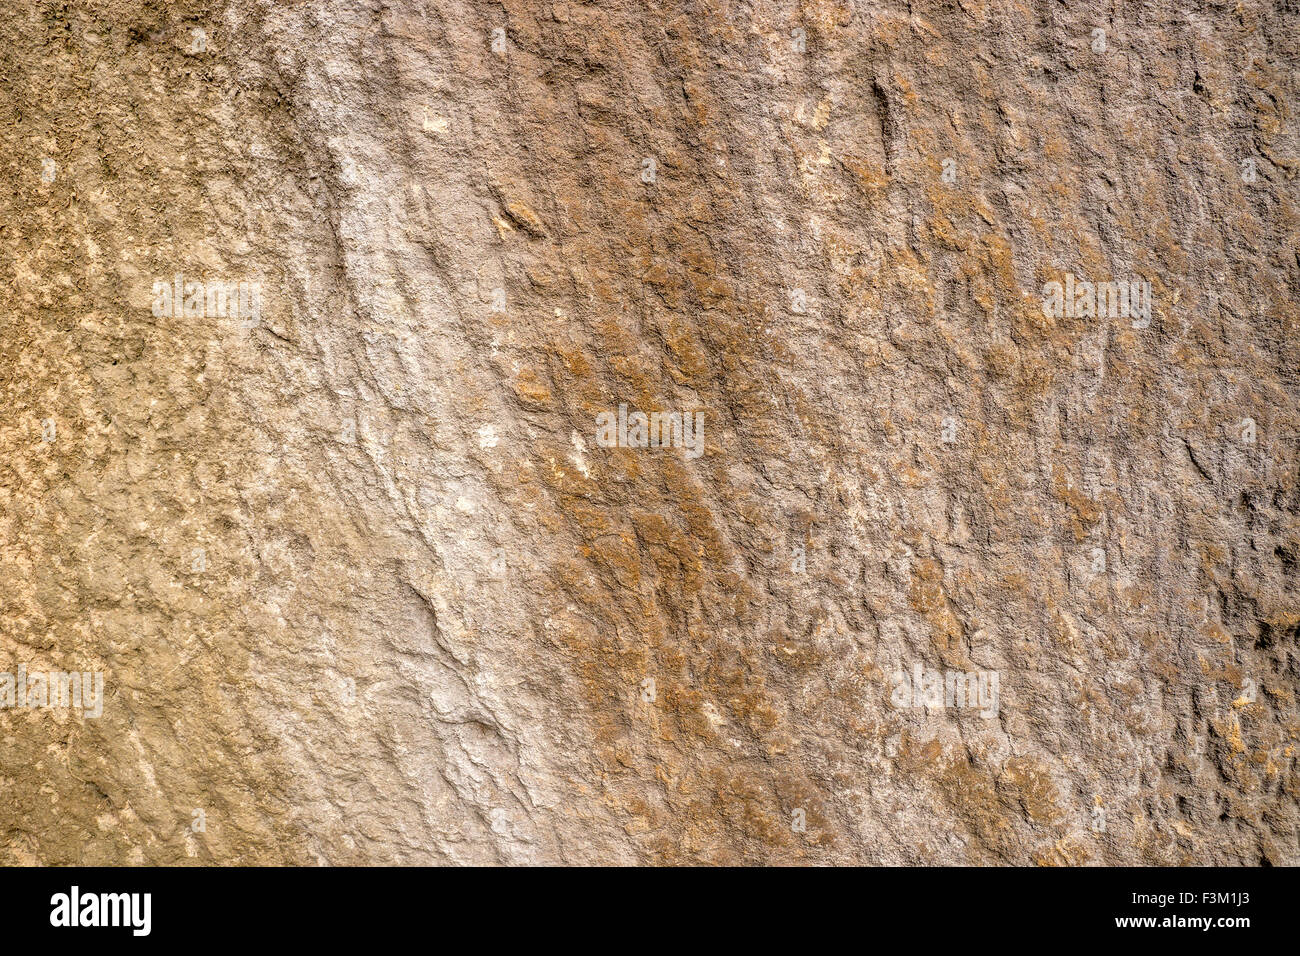 Weathered old rock surface texture background Stock Photo